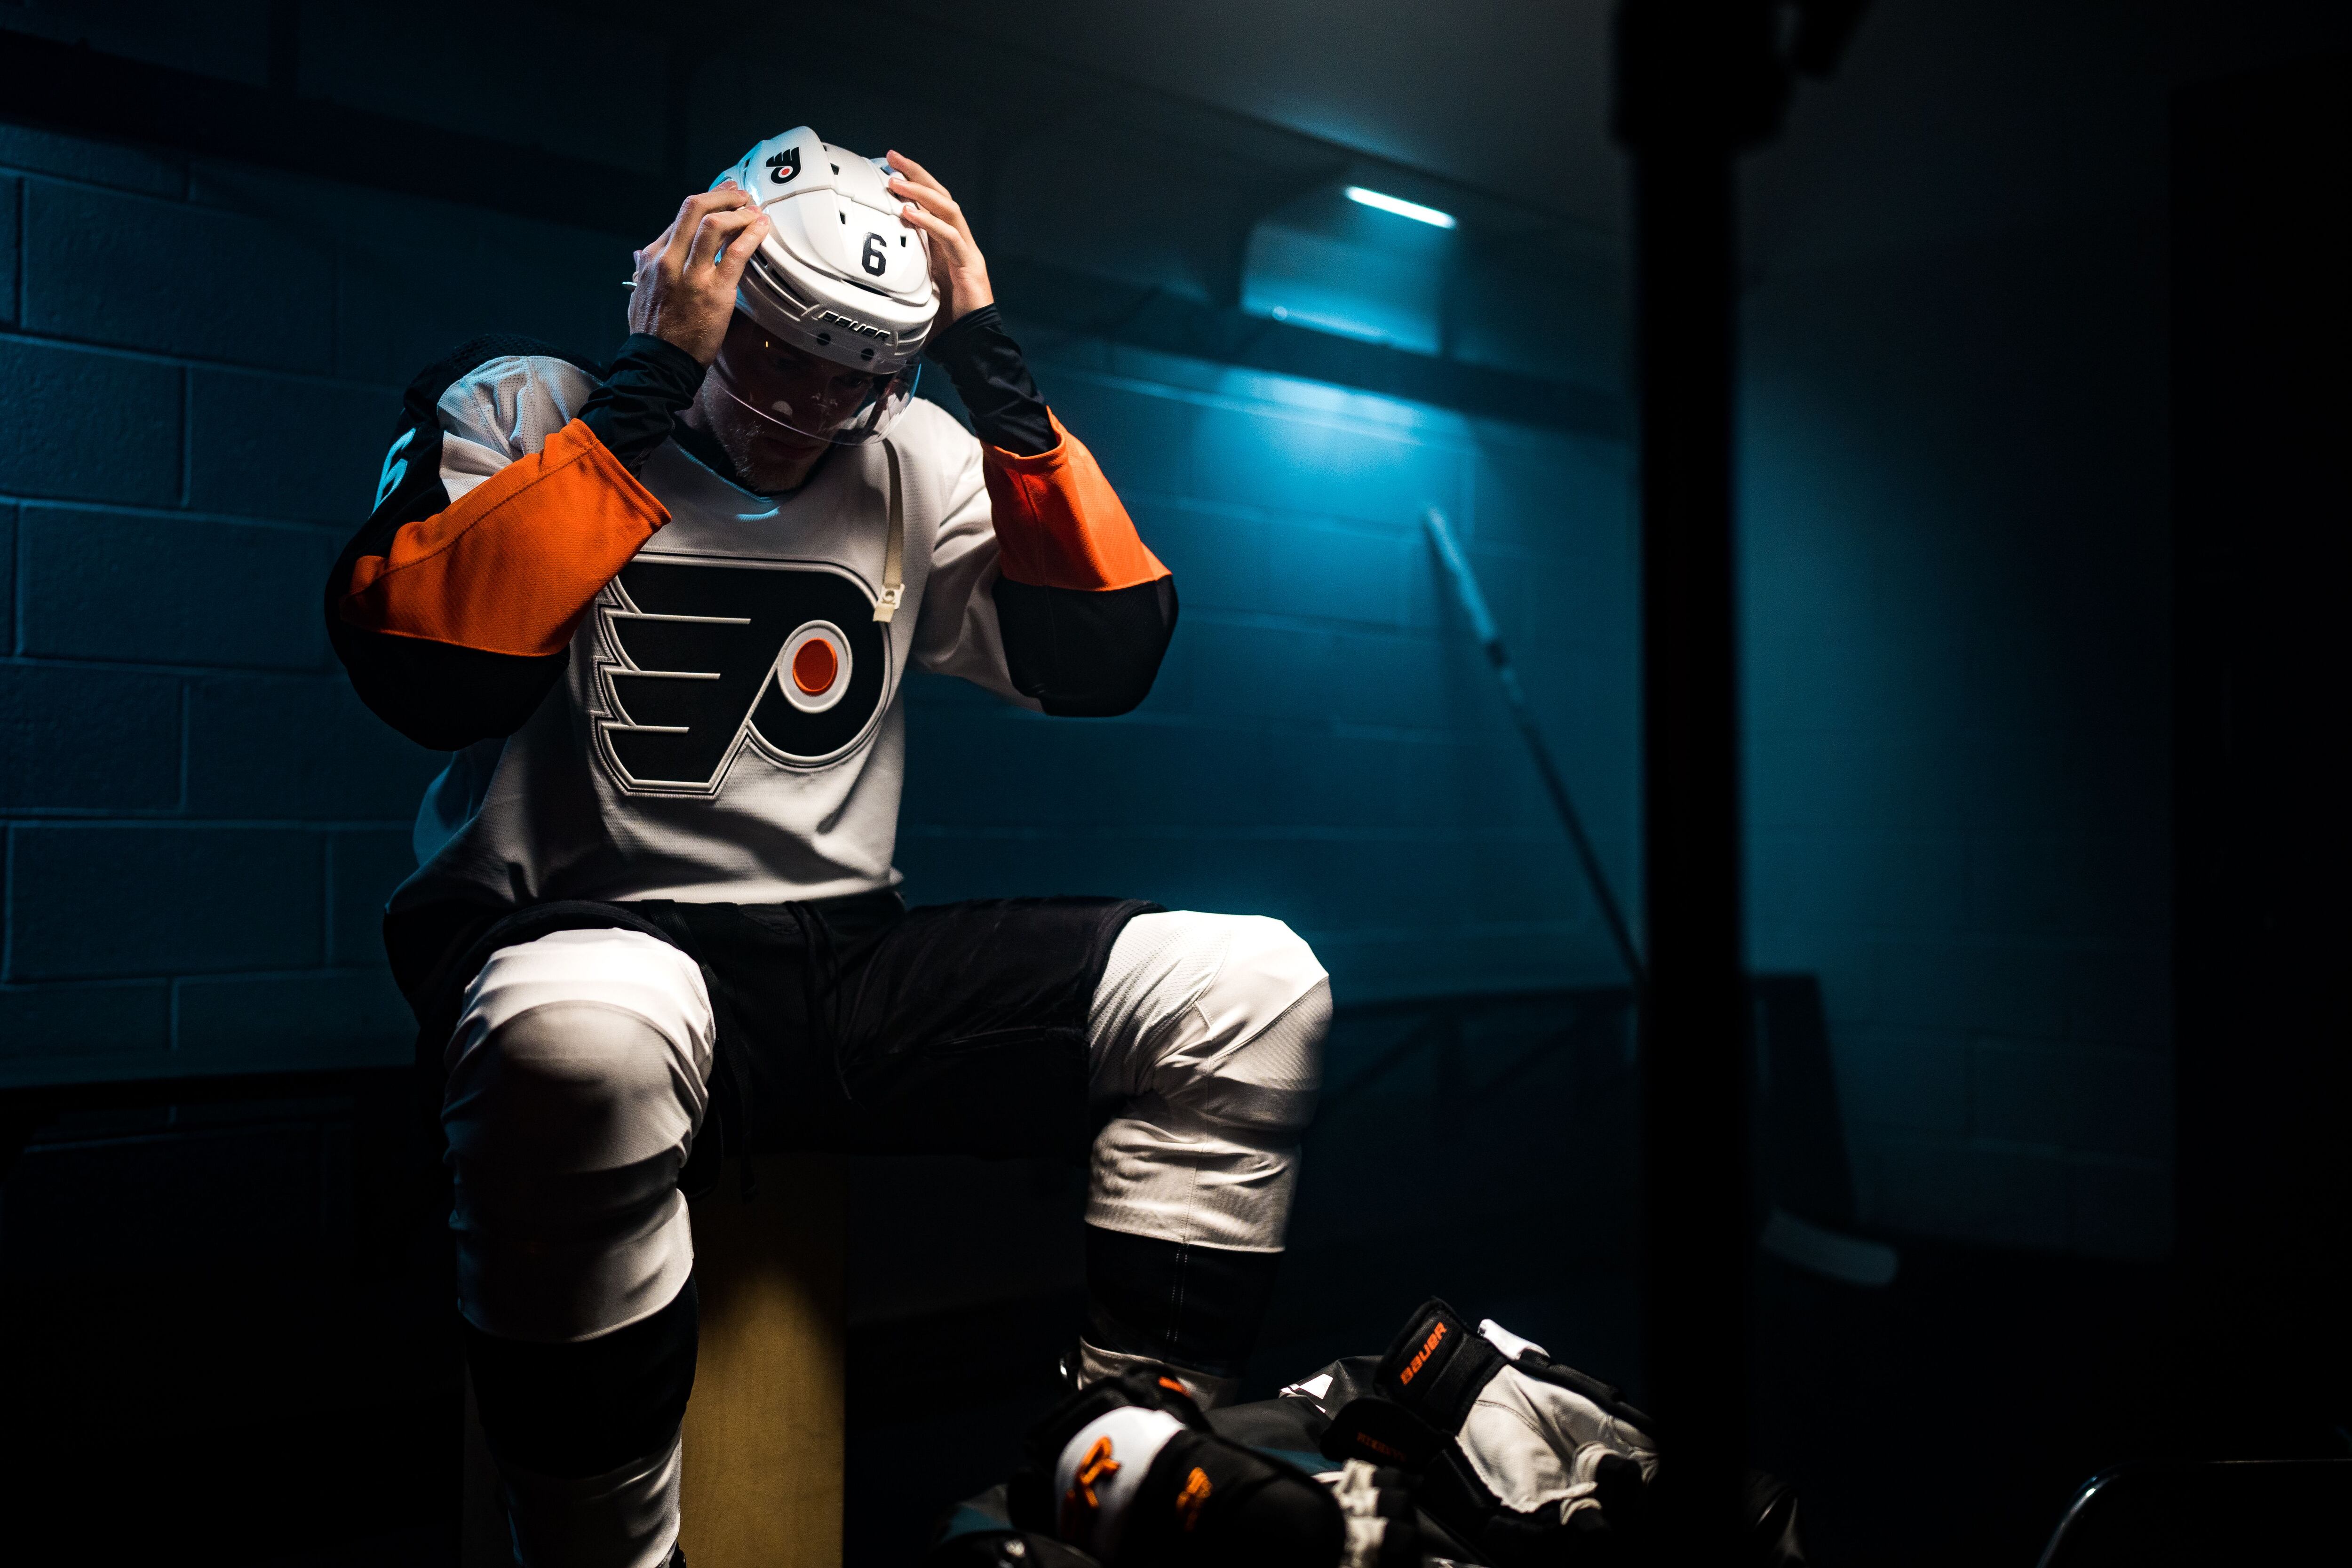 Flyers Bring Back the Burnt Orange with Reverse Retro Jersey